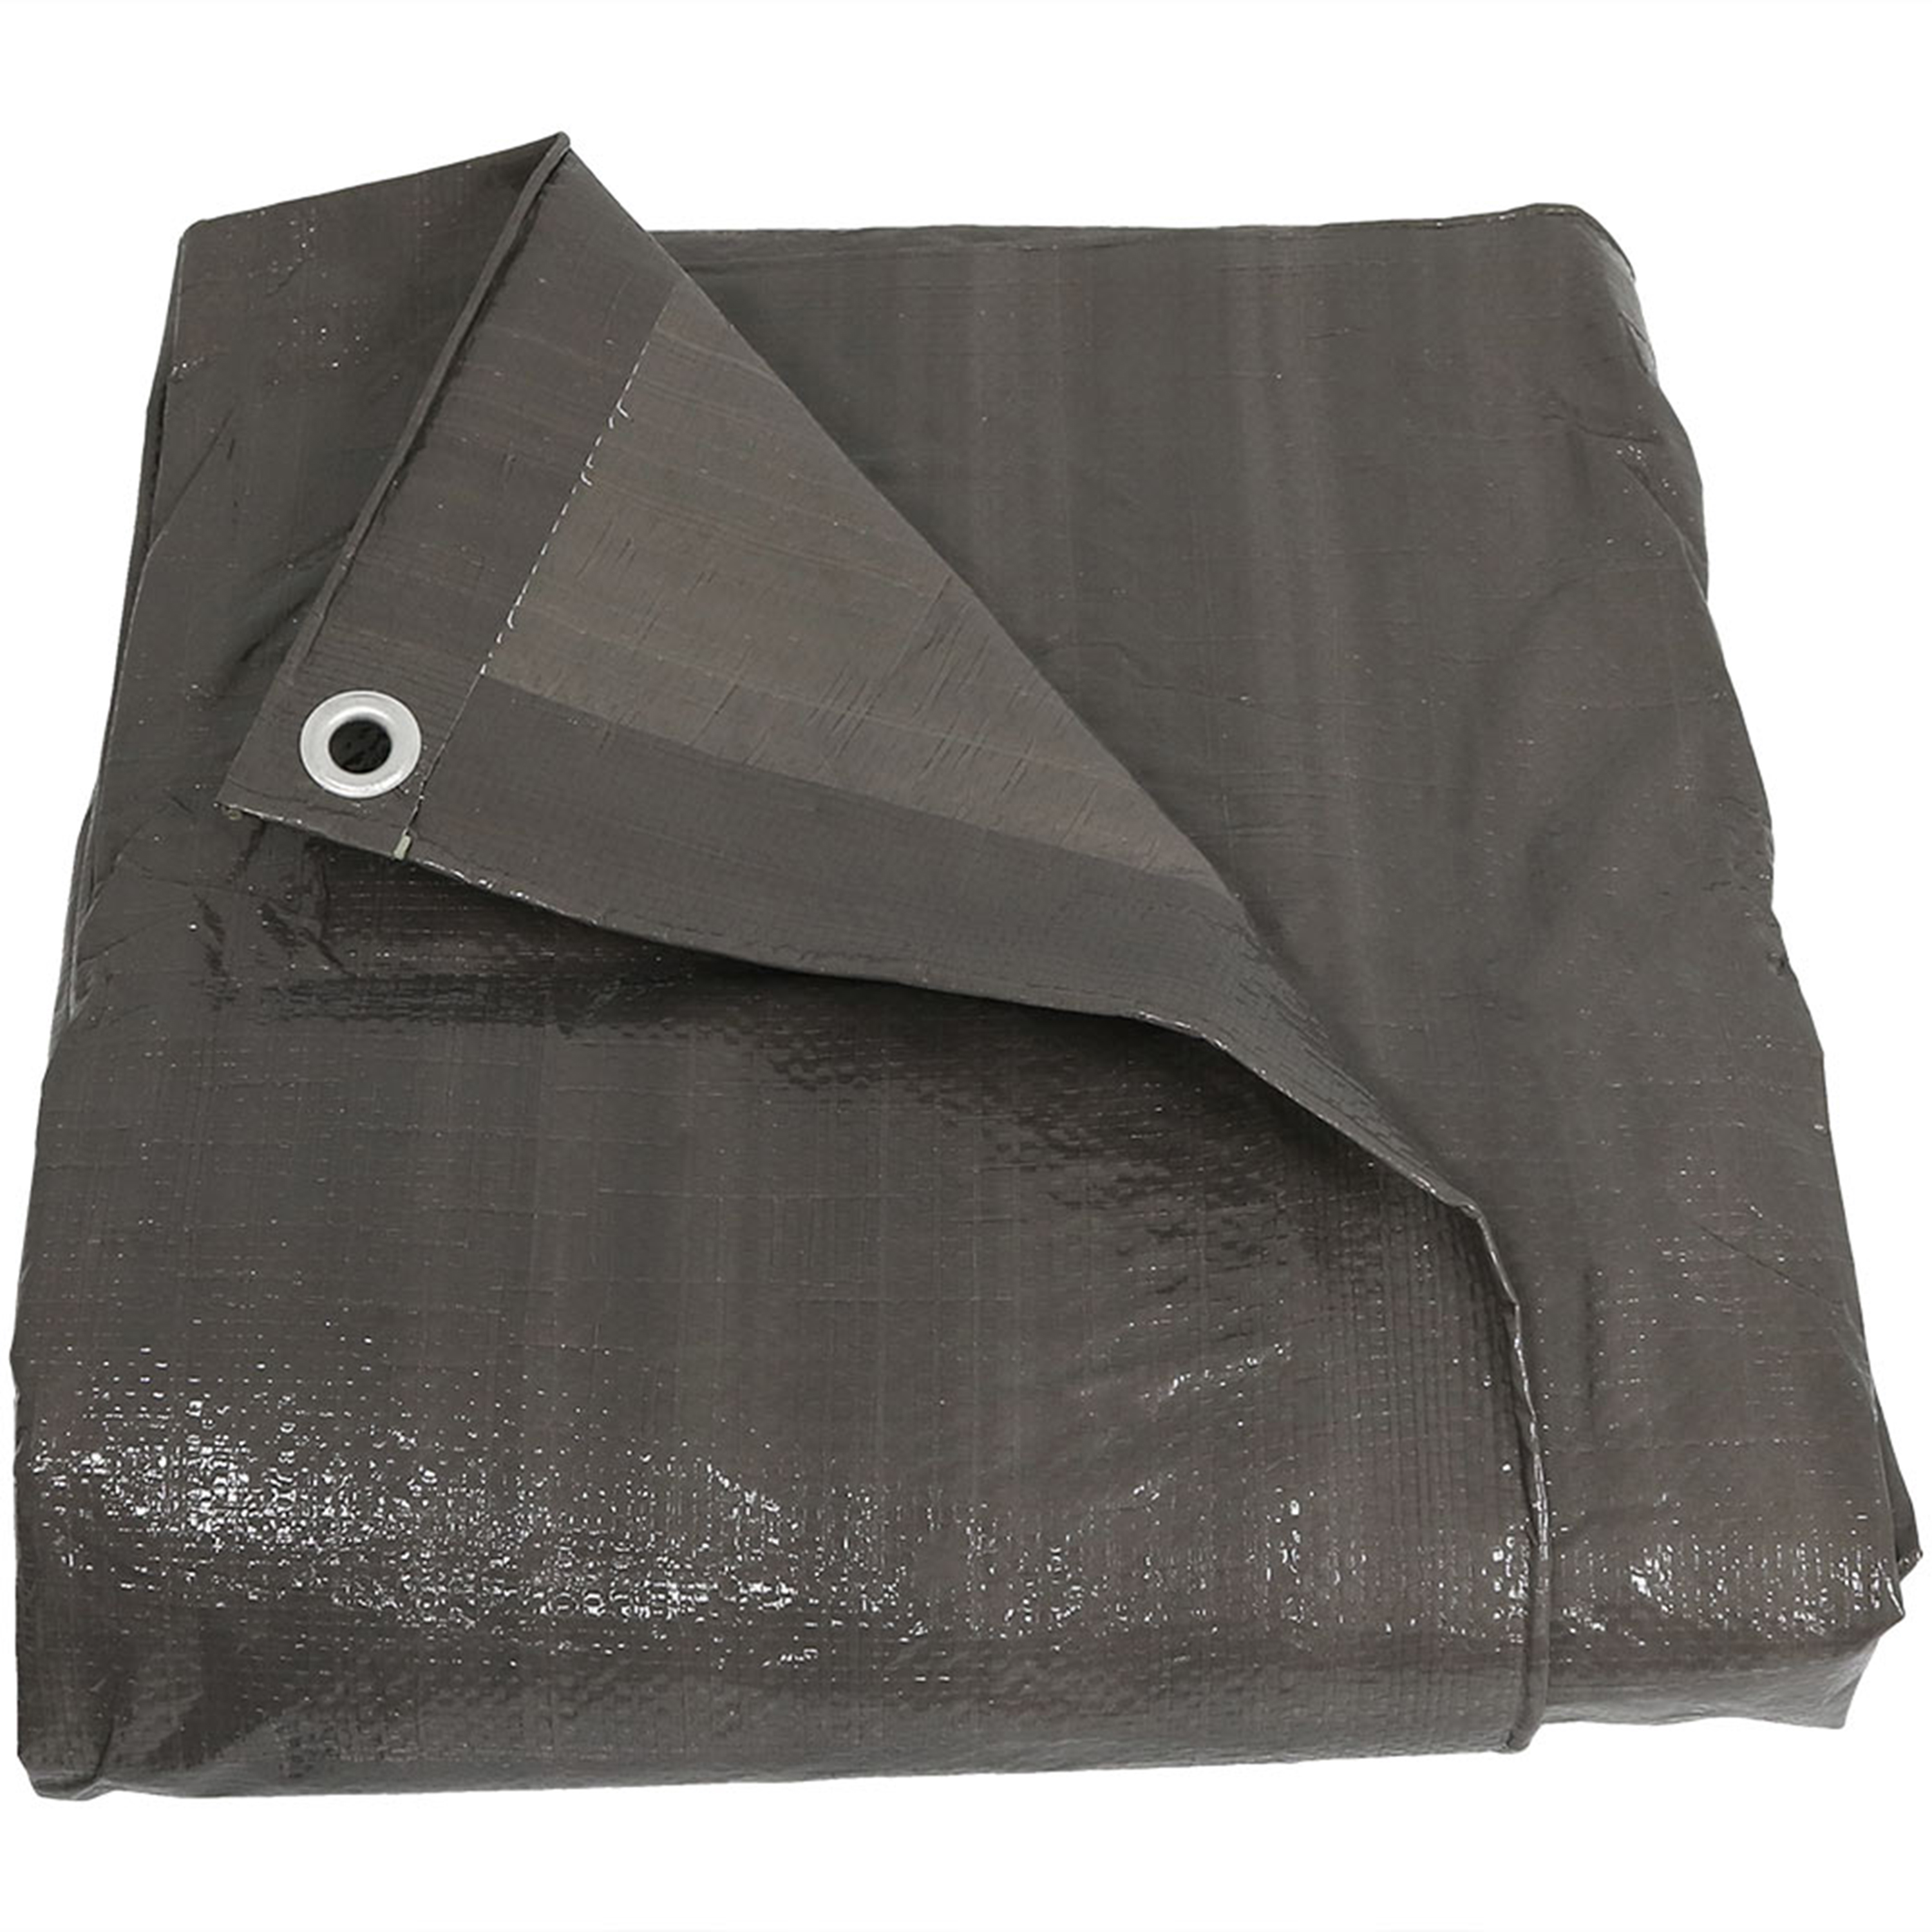 Sunnydaze Waterproof Multi-Purpose Poly Tarp, Color and Size Options Available, Dark Grey, 30-feet x 40-feet